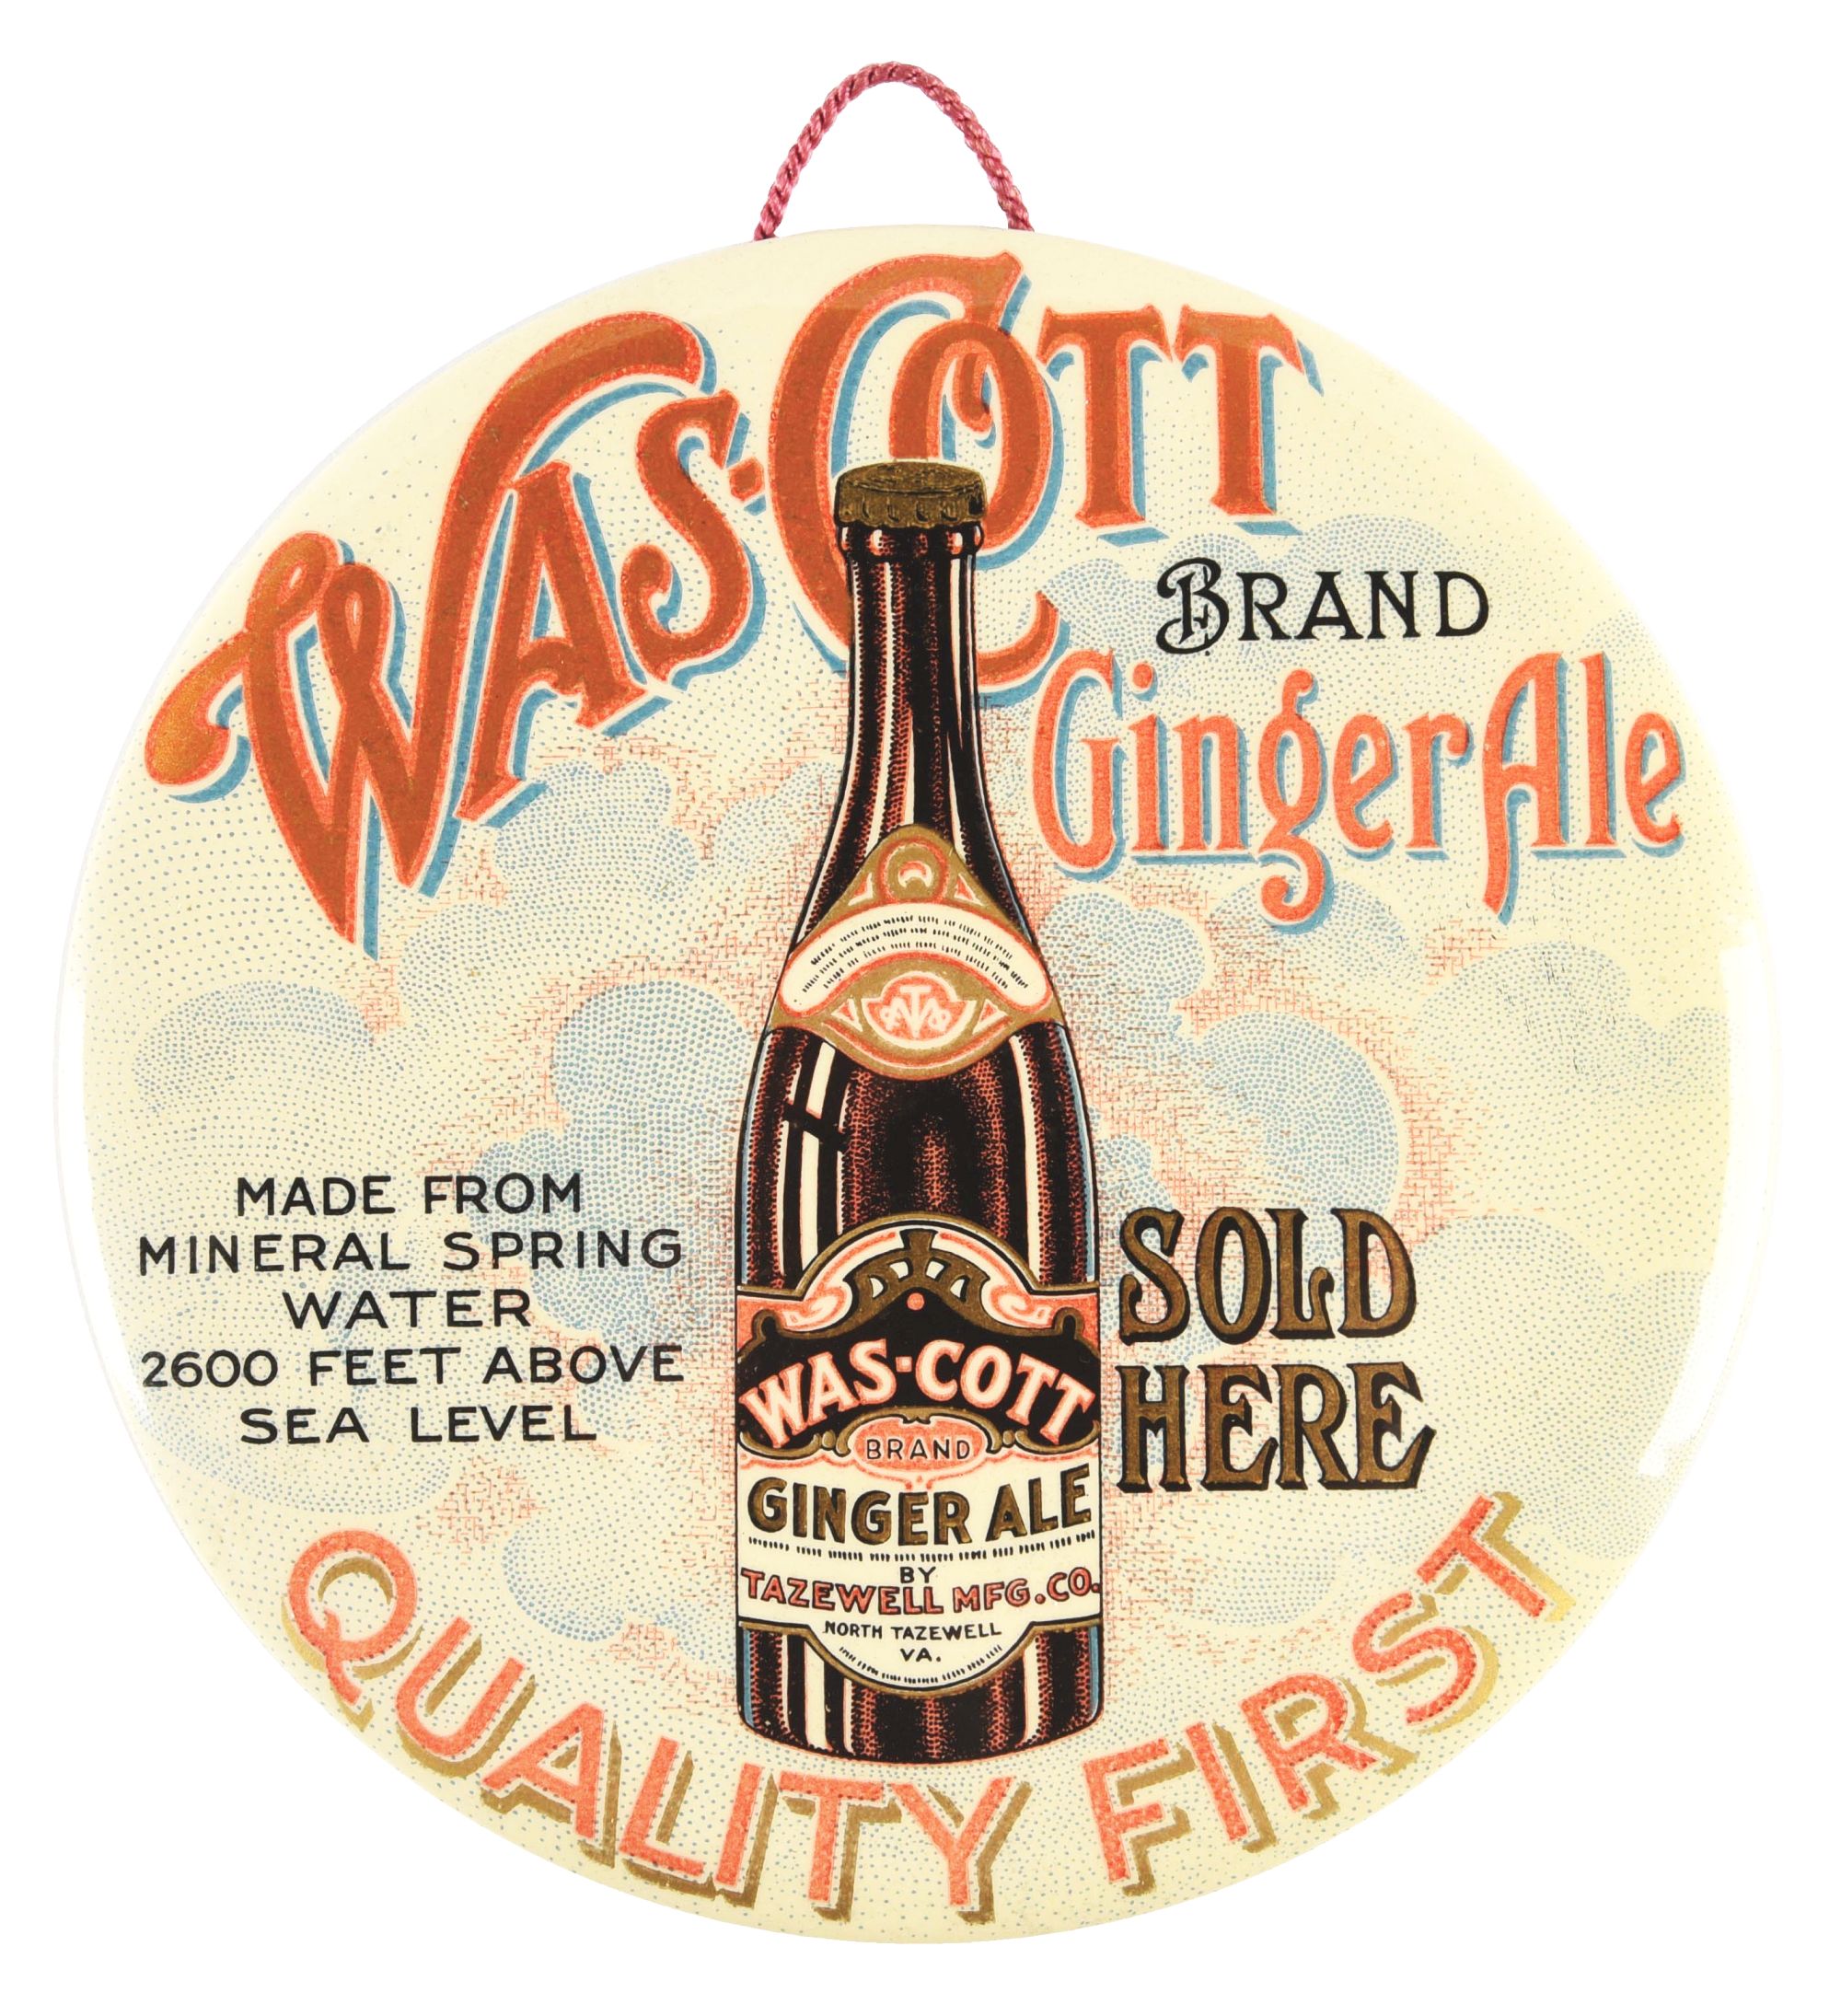 Was-Cott Brand Ginger Ale celluloid-over-cardboard advertisement, 6in diameter. Excellent condition. Beautiful graphics and color. Estimate $8,000-$12,000